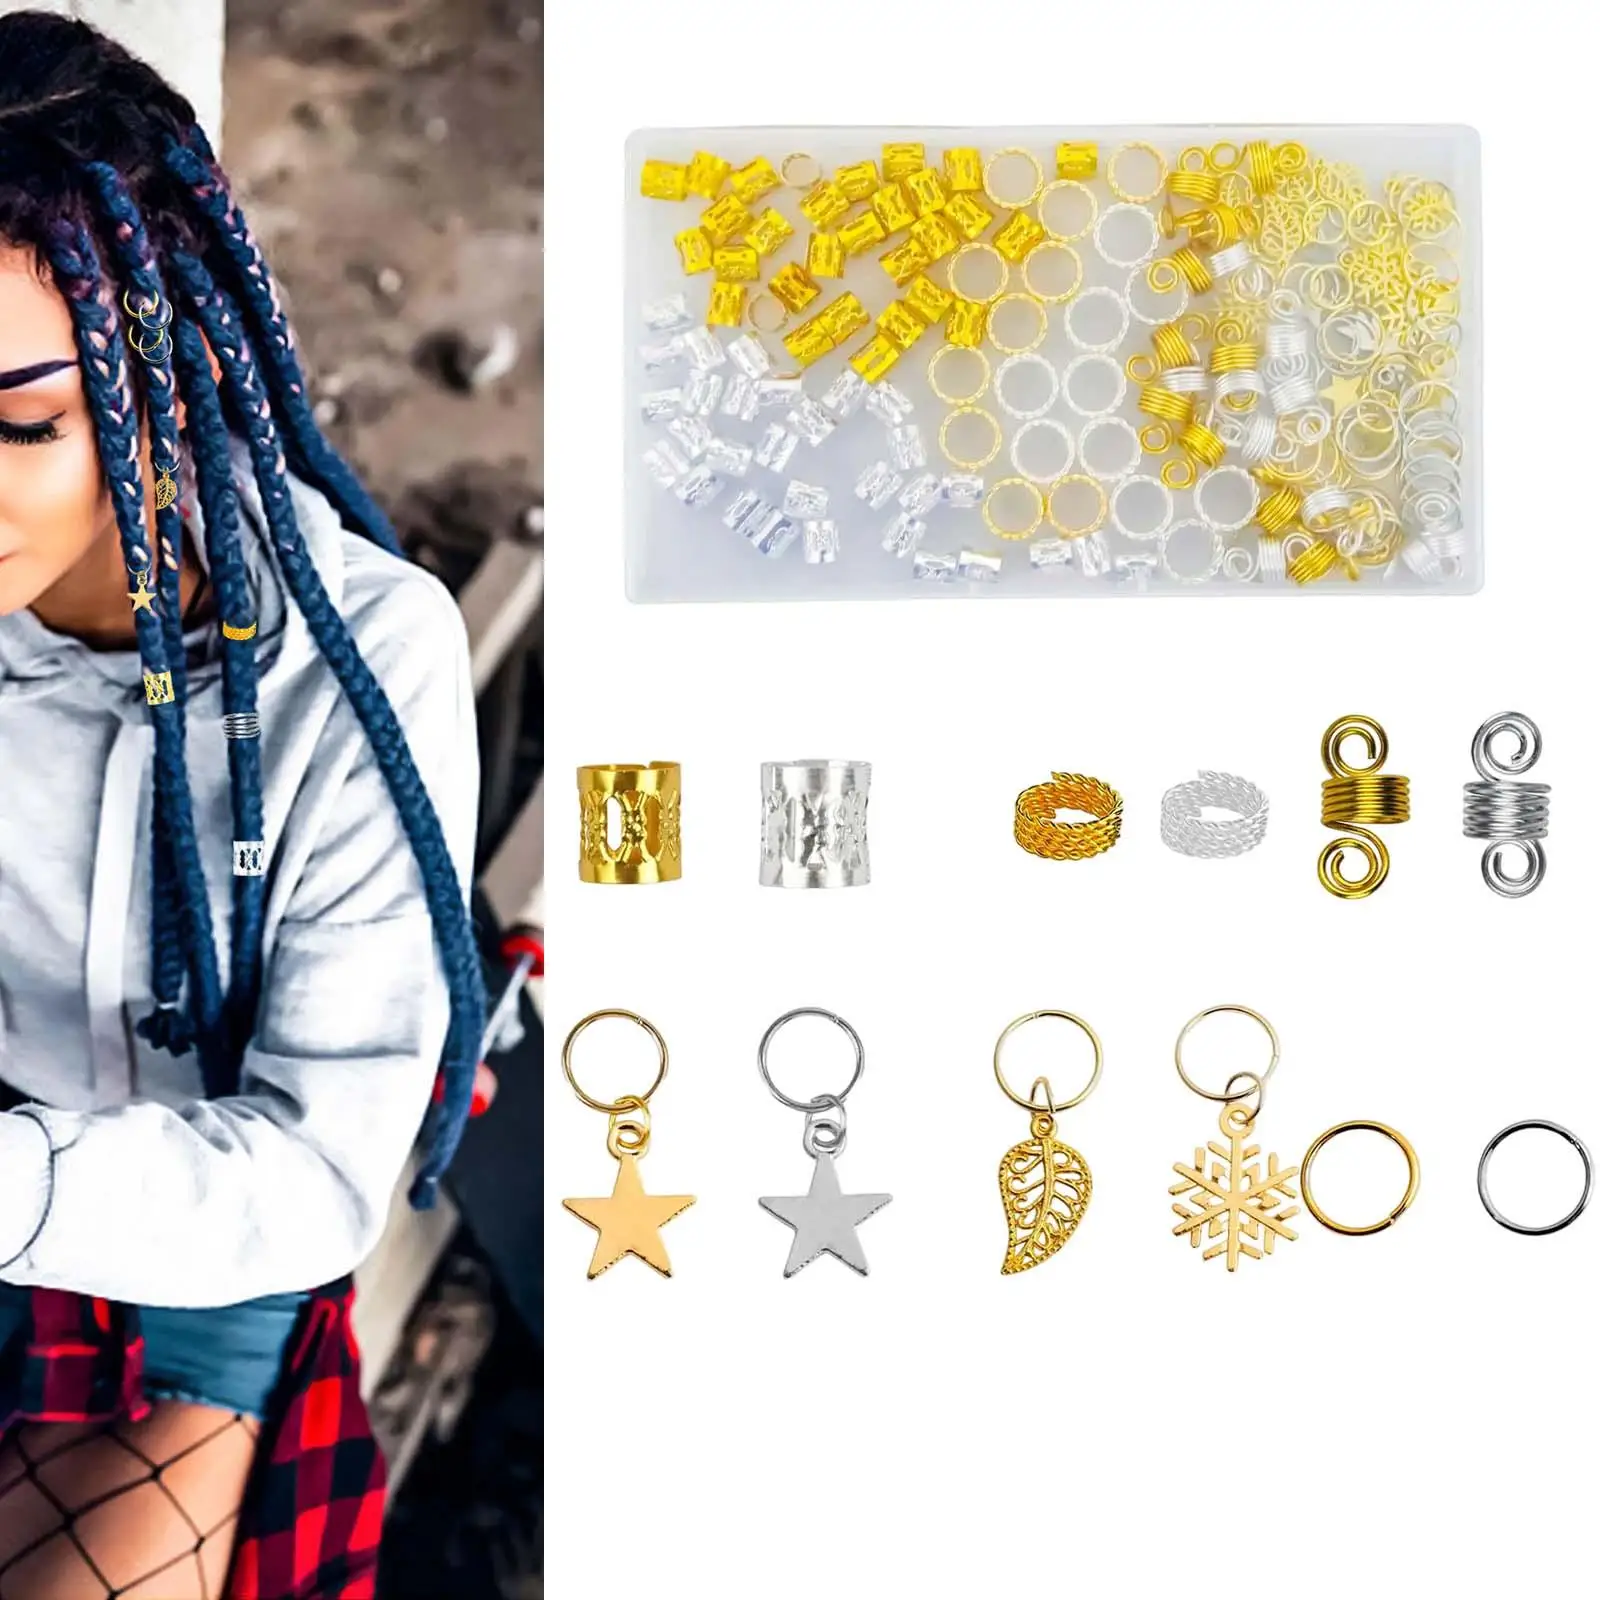 160 Pieces Braiding Jewelry Hair Clips Dreadlocks Hair Cuffs for Party, Wedding, Taking Pictures Reusable Stretchable Flexible